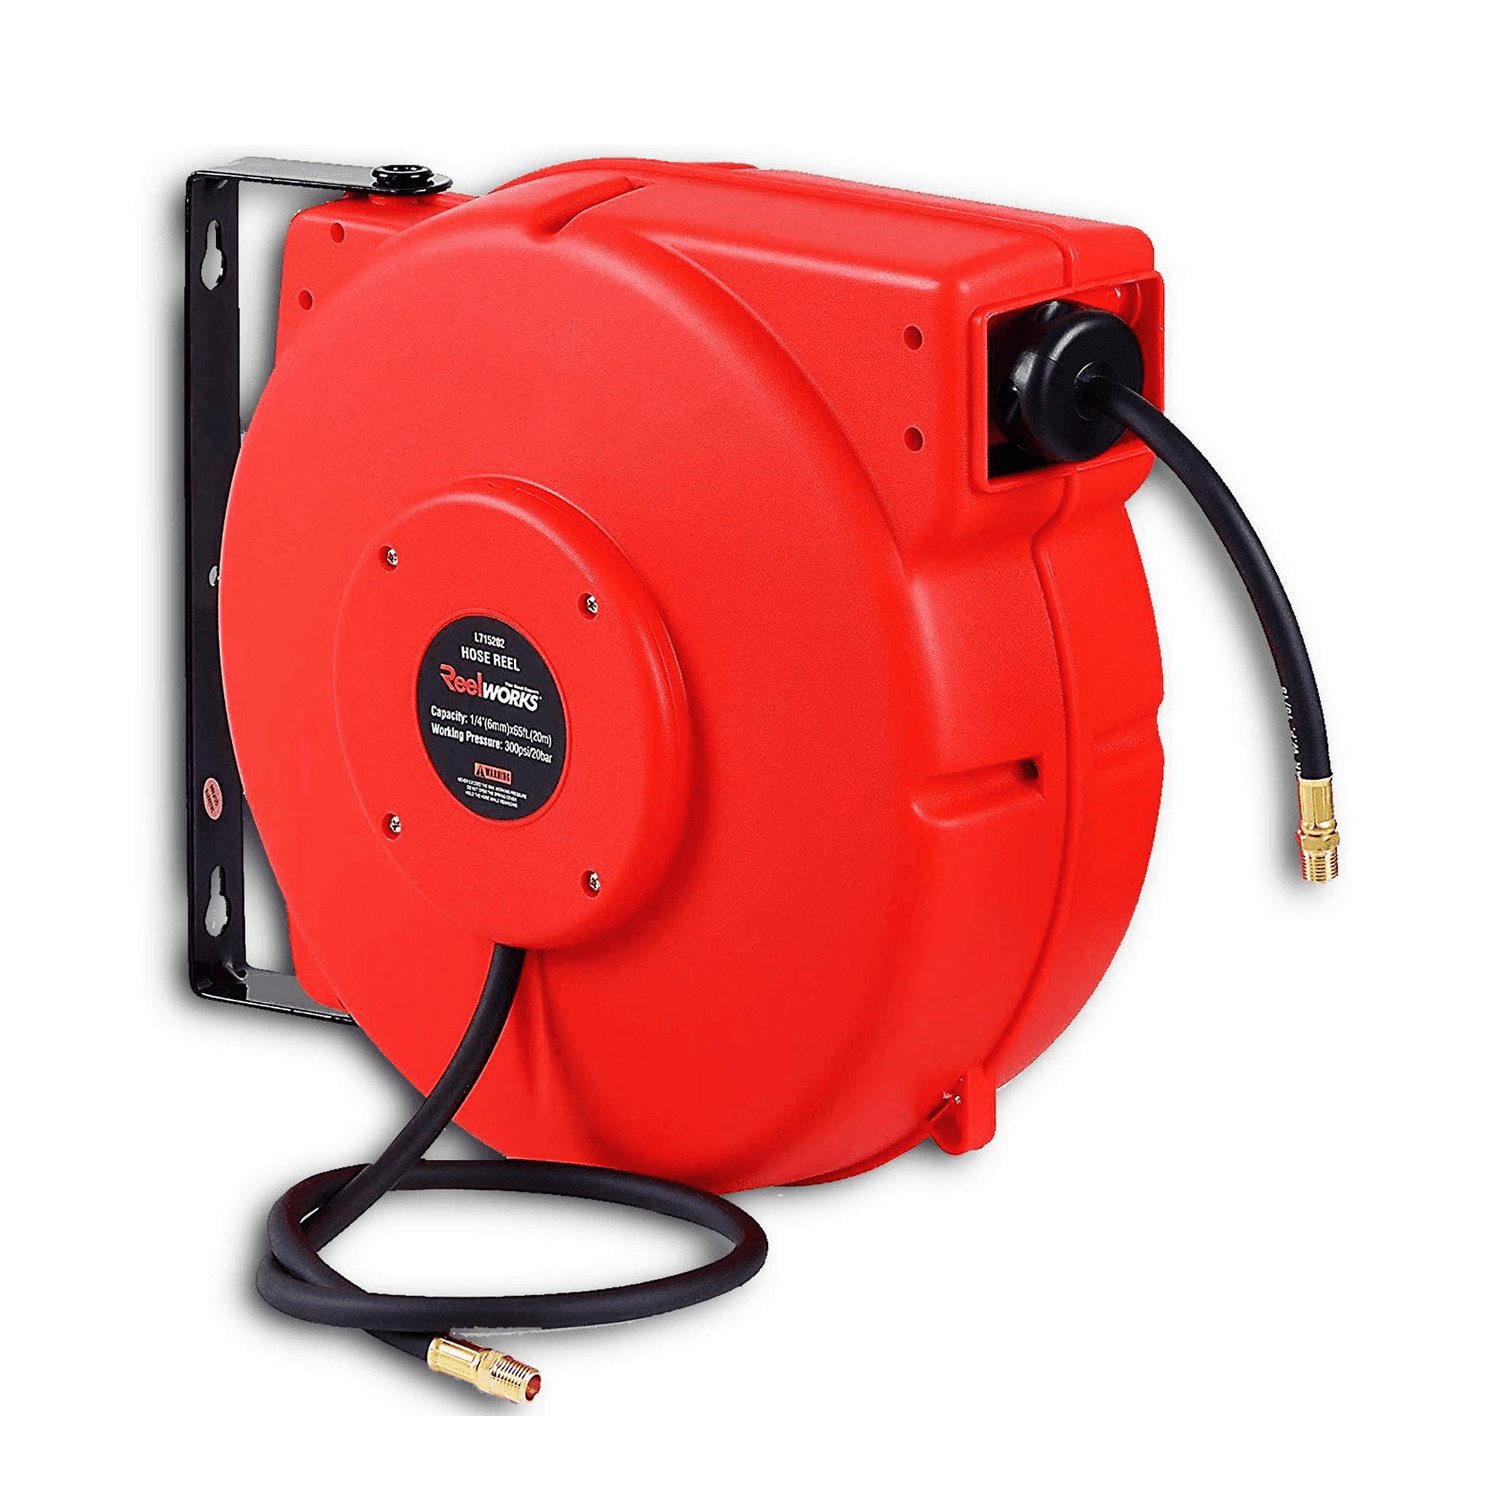 ReelWorks Mountable Retractable Air Hose Reel - 1/4 x 65'FT, 3' Ft Lead-In  Hose, 1/4 NPT Connections